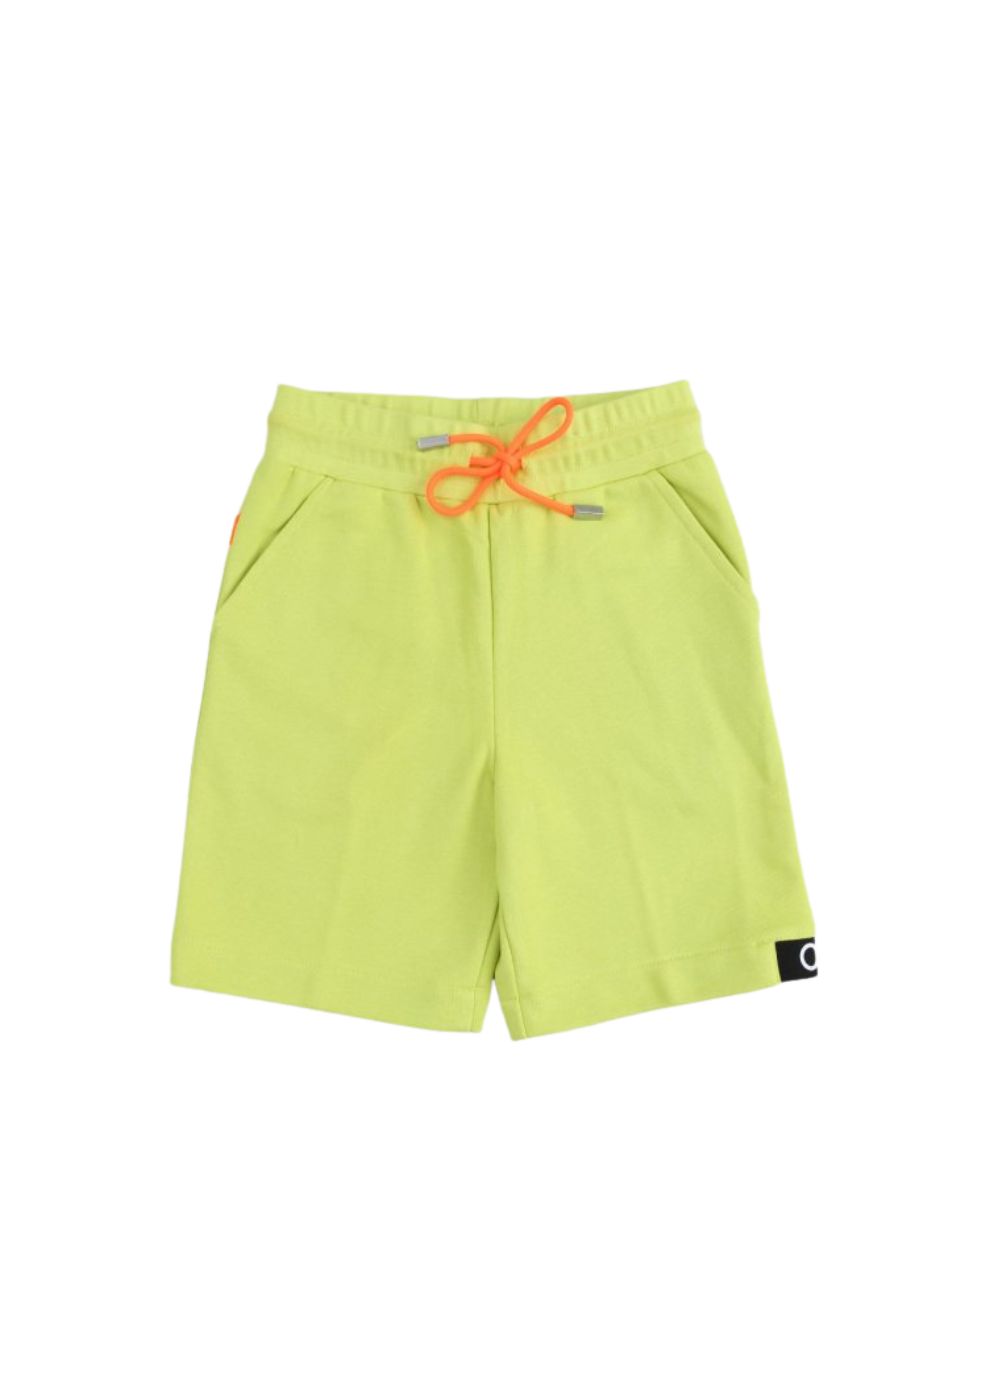 Featured image for “Suns Shorts Lime Laccio Fluo”